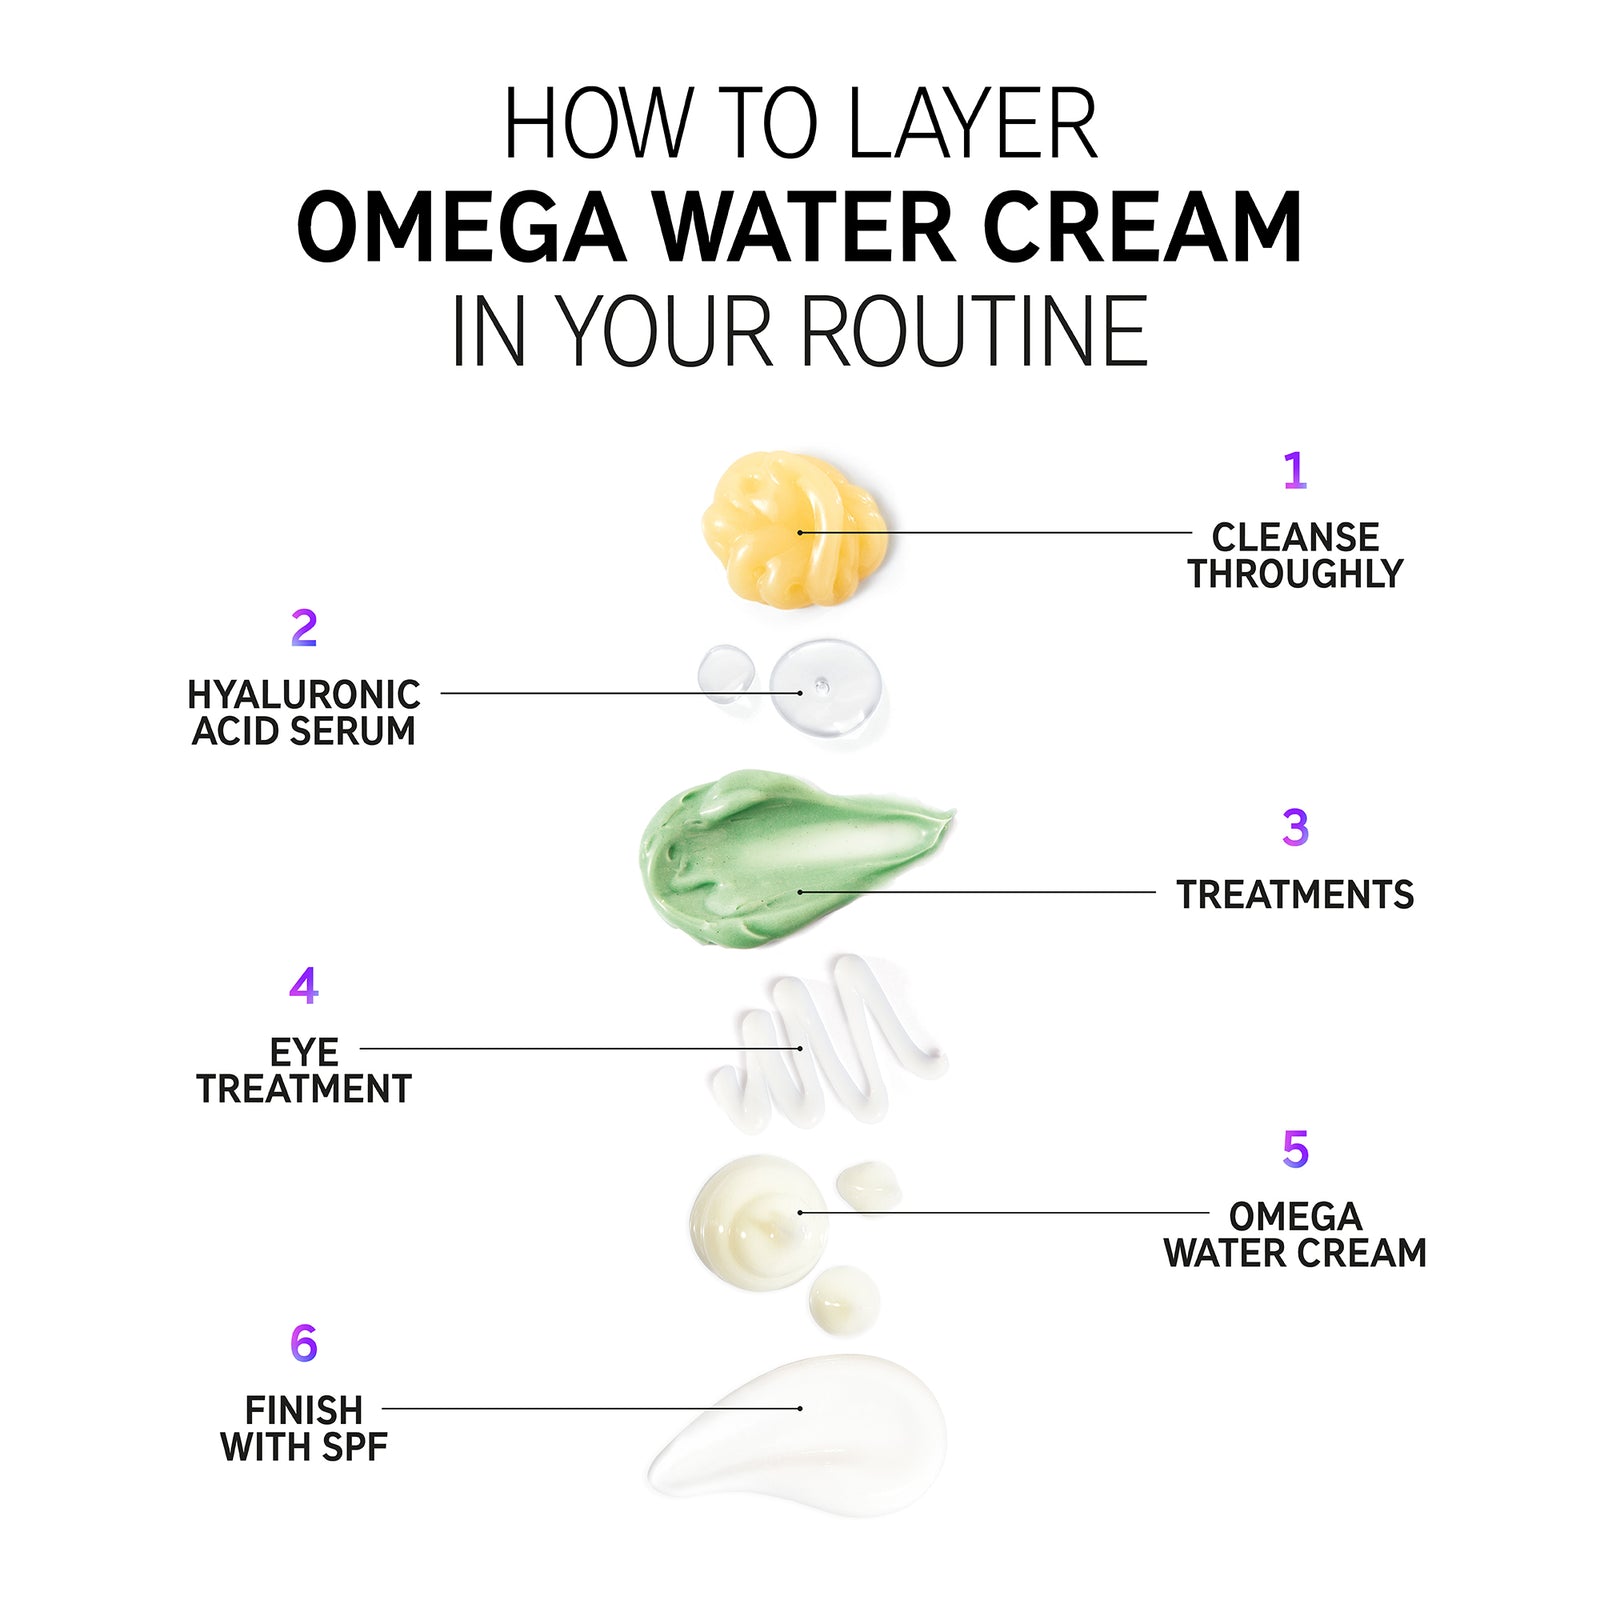 How to layer Omega water cream Infographic